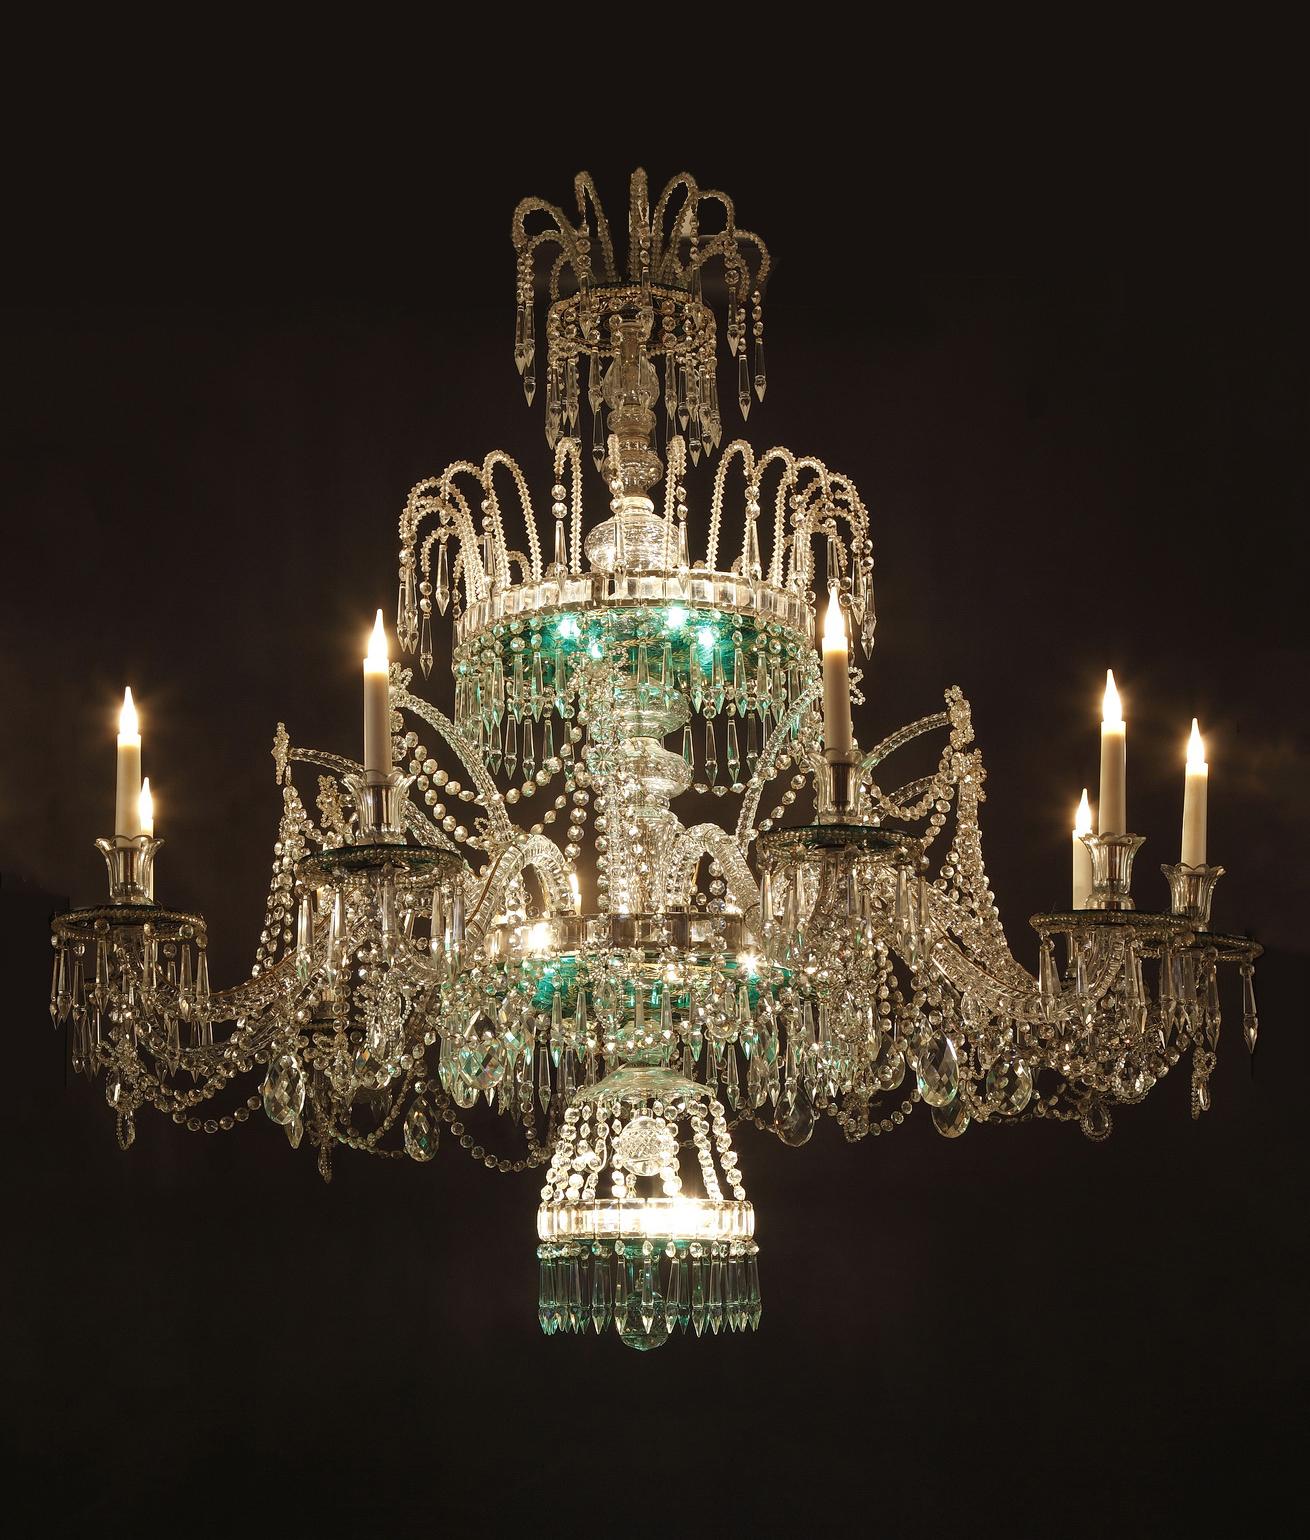 A magnificent cut crystal three-stage chandelier attributed to the Crystal Manufacture of the Granja, underlined by crown of prisms, pearls and mirza. The lower part holds ten light arms finishing by green crystal cups with gold foliate patterns.